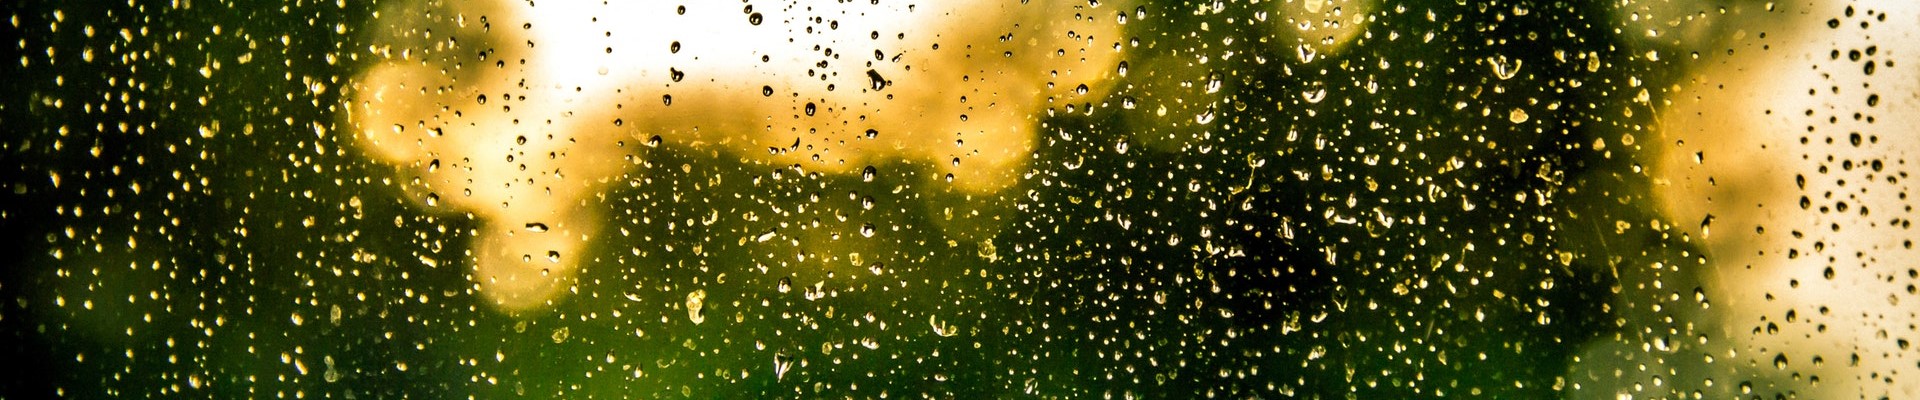 rain/water droplets collects on a window